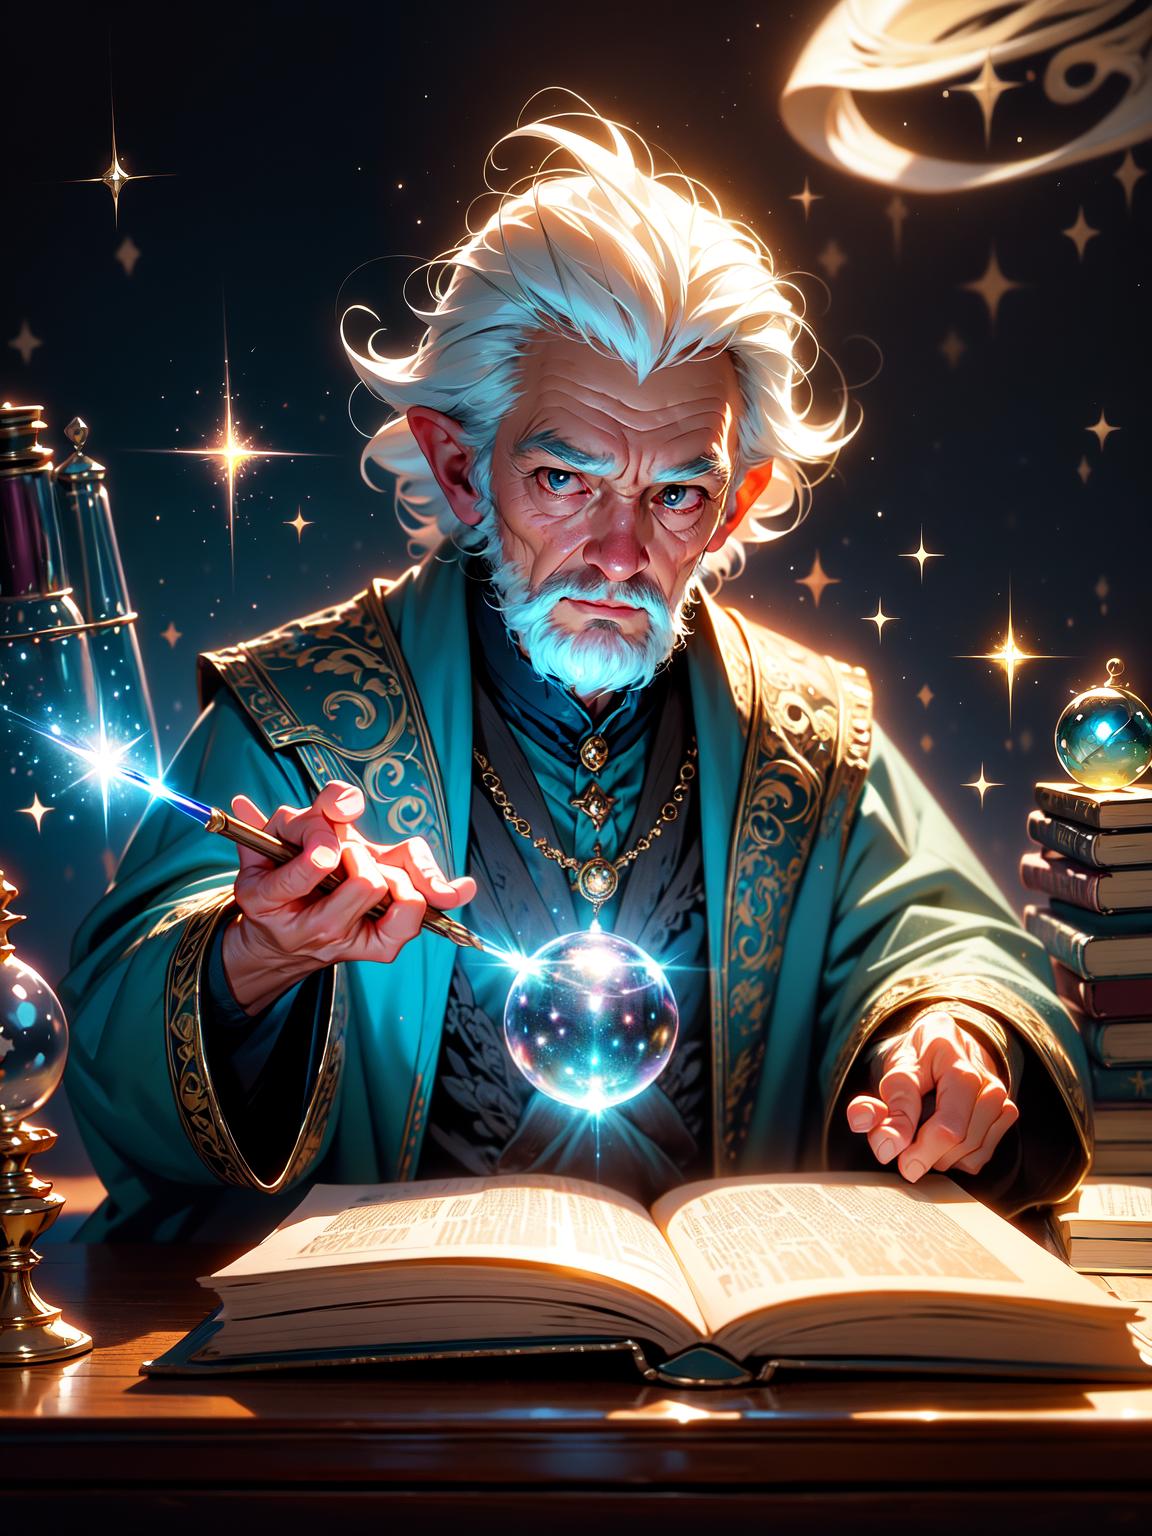  master piece, best quality, ultra detailed, highres, 4k.8k, Elderly wizard, Casting a spell, holding a magic wand, Serious, BREAK Aged wizard, Wizard's study, Books, potion bottles, crystal ball, owl, BREAK Mysterious and mystical, Soft glowing light, faint sparkles, magic particles